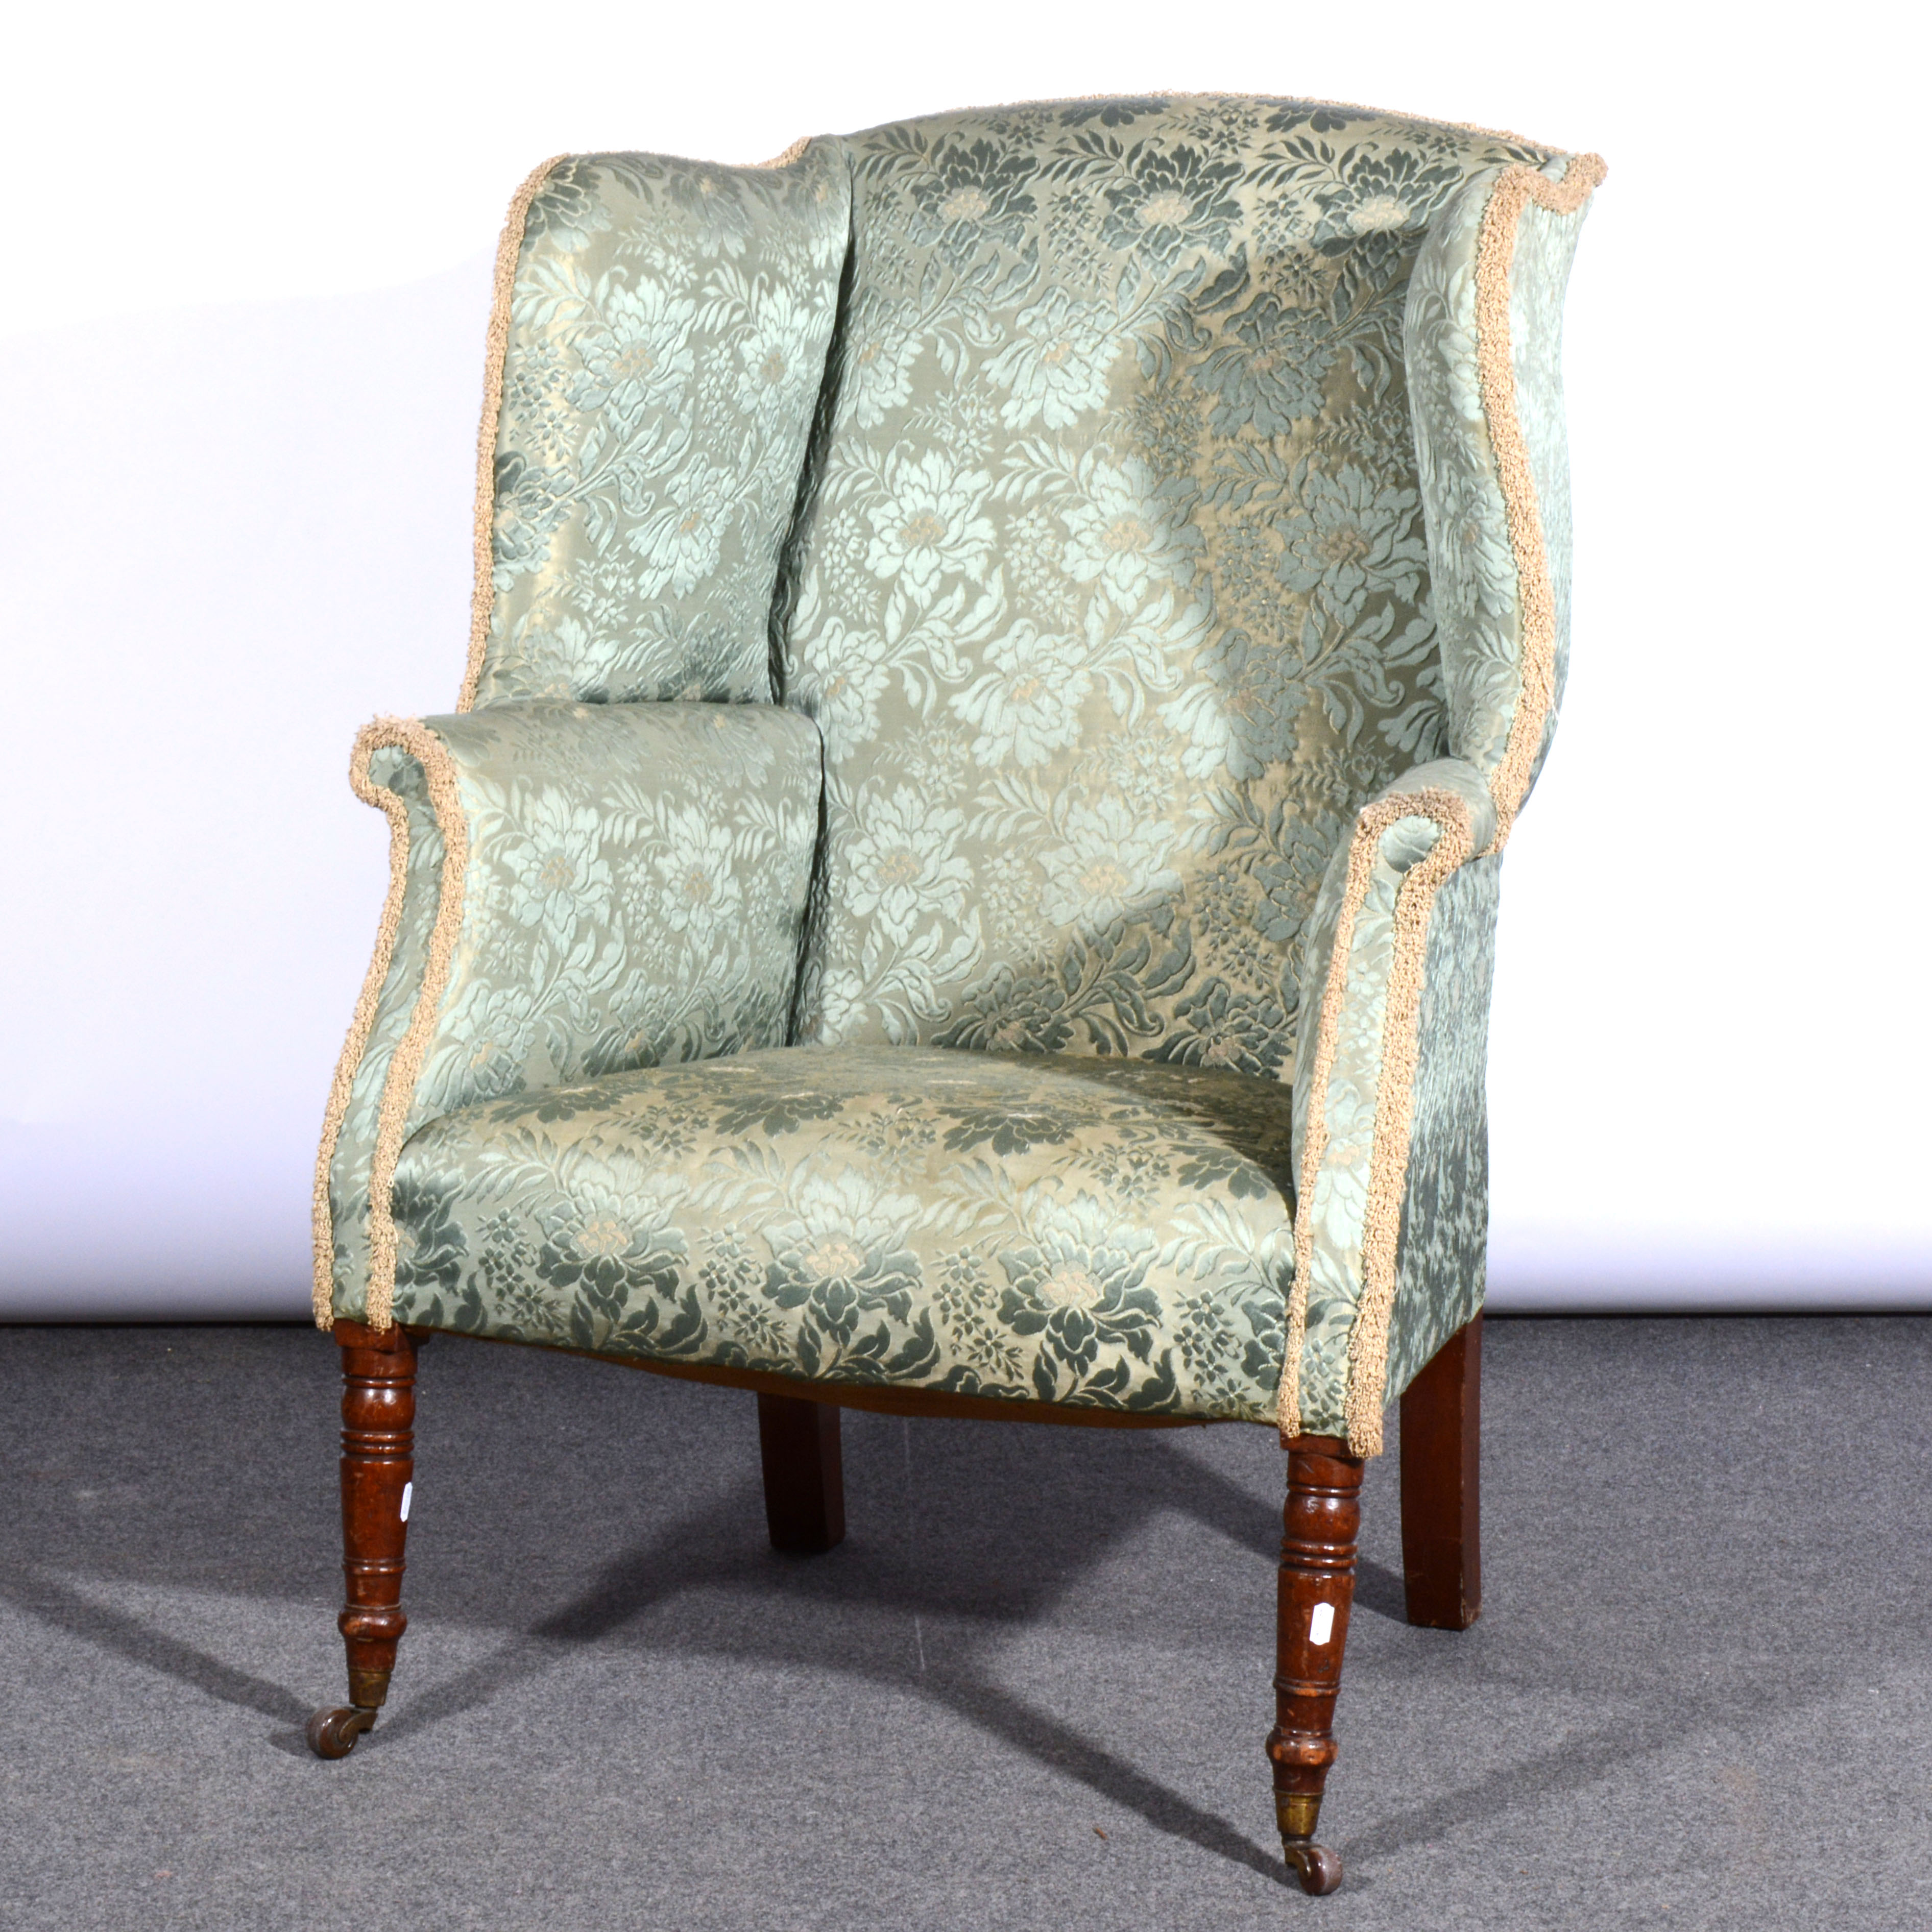 Victorian wing back chair, turned and ringed mahogany legs on castors, 78cm.